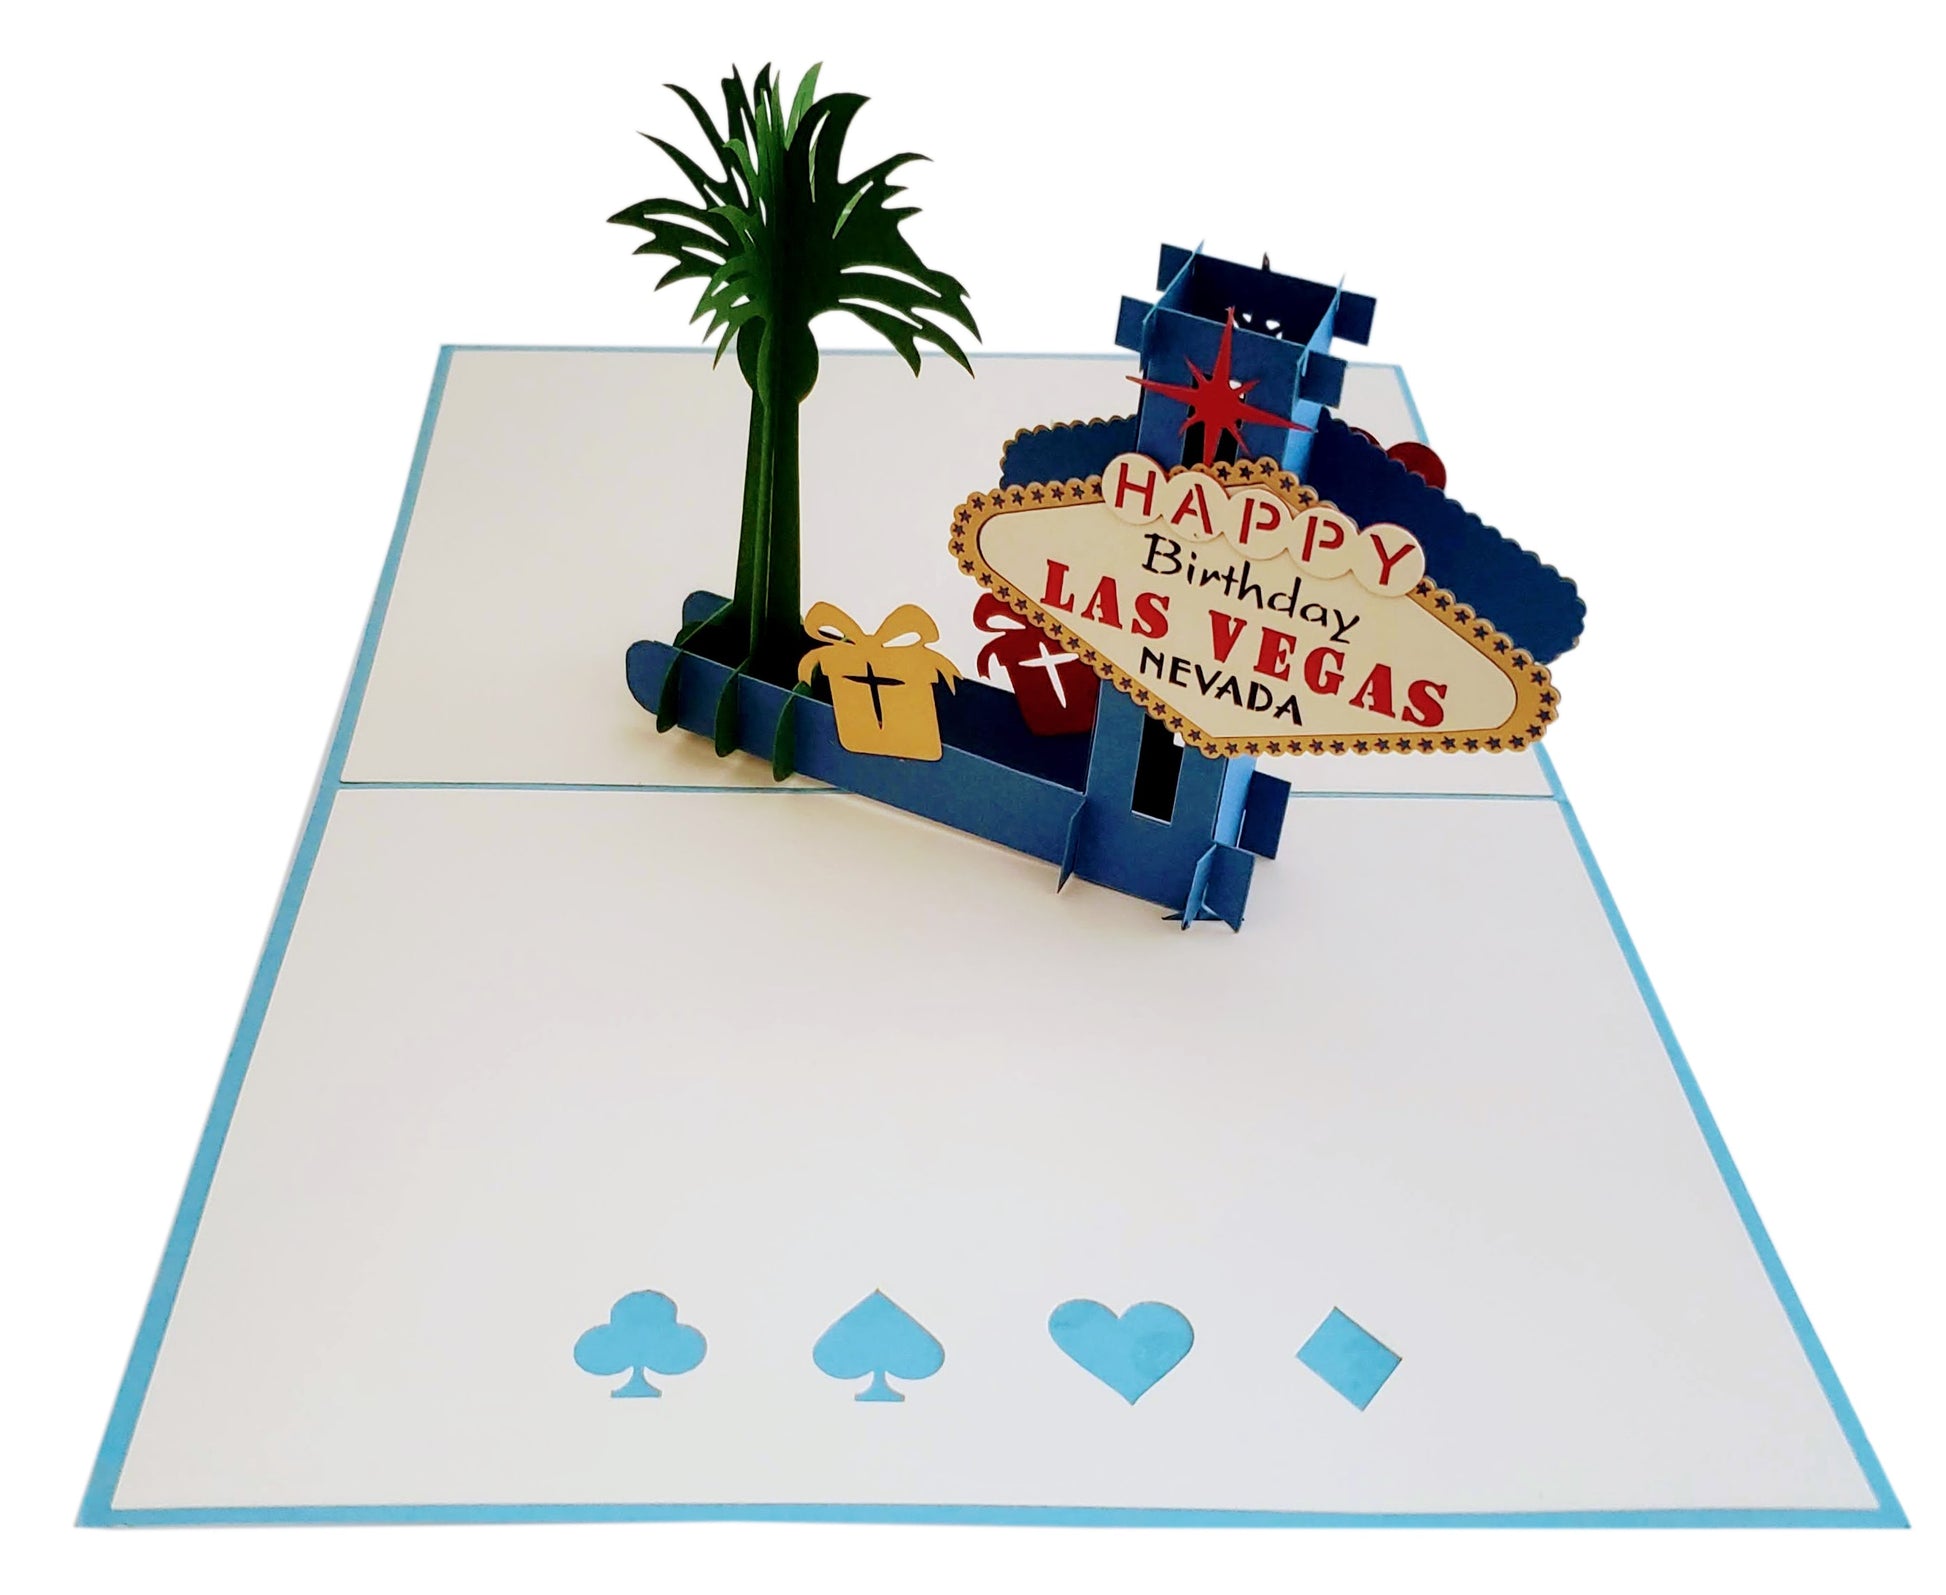 Happy Birthday Blue Cover Las Vegas 3D Pop Up Greeting Card - Birthday - iGifts And Cards